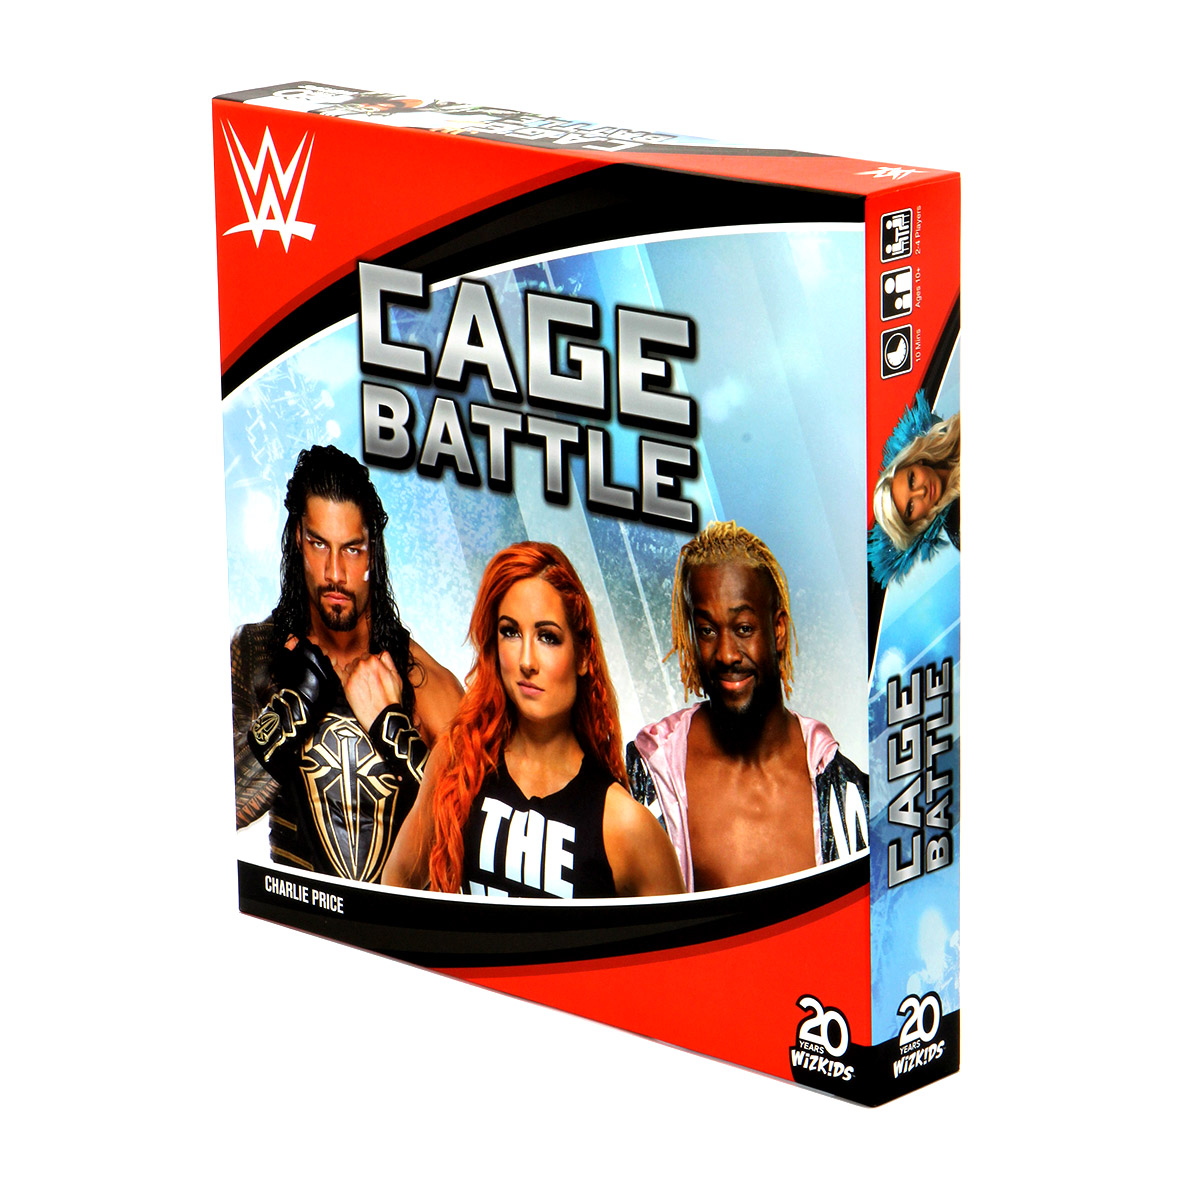 WizKids | Be the Last One Standing in WWE Cage Battle—Coming Soon!